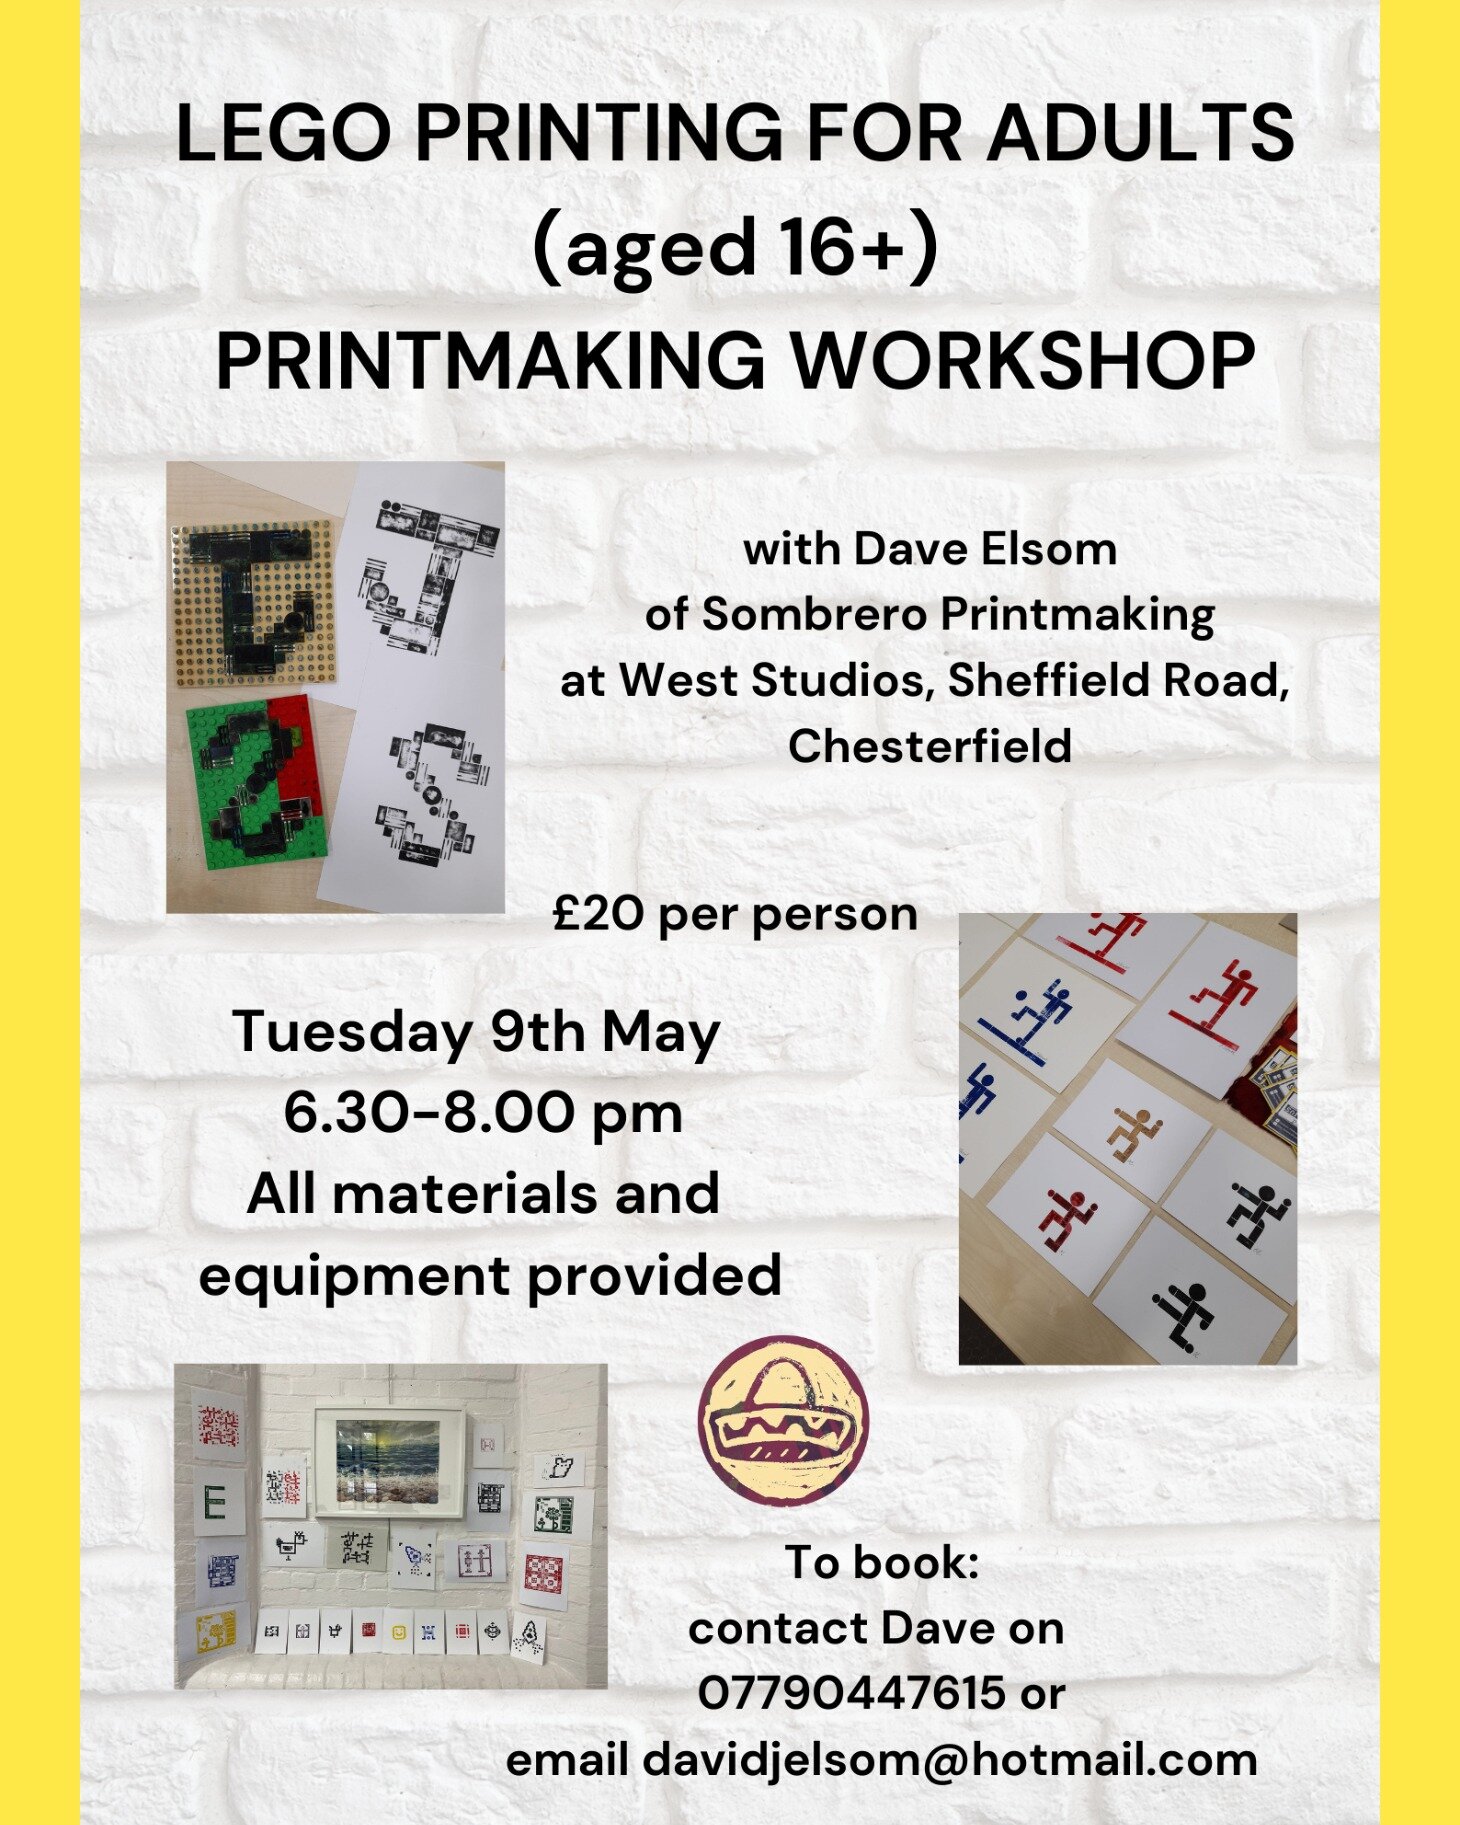 Join Chesterfield based printmaker Dave Elsom at West Studios for a Lego printing for adults workshop.
It's just &pound;20 per person for a 90 minute workshop where you'll use Lego to make printing plates so you can print off your unique designs onto